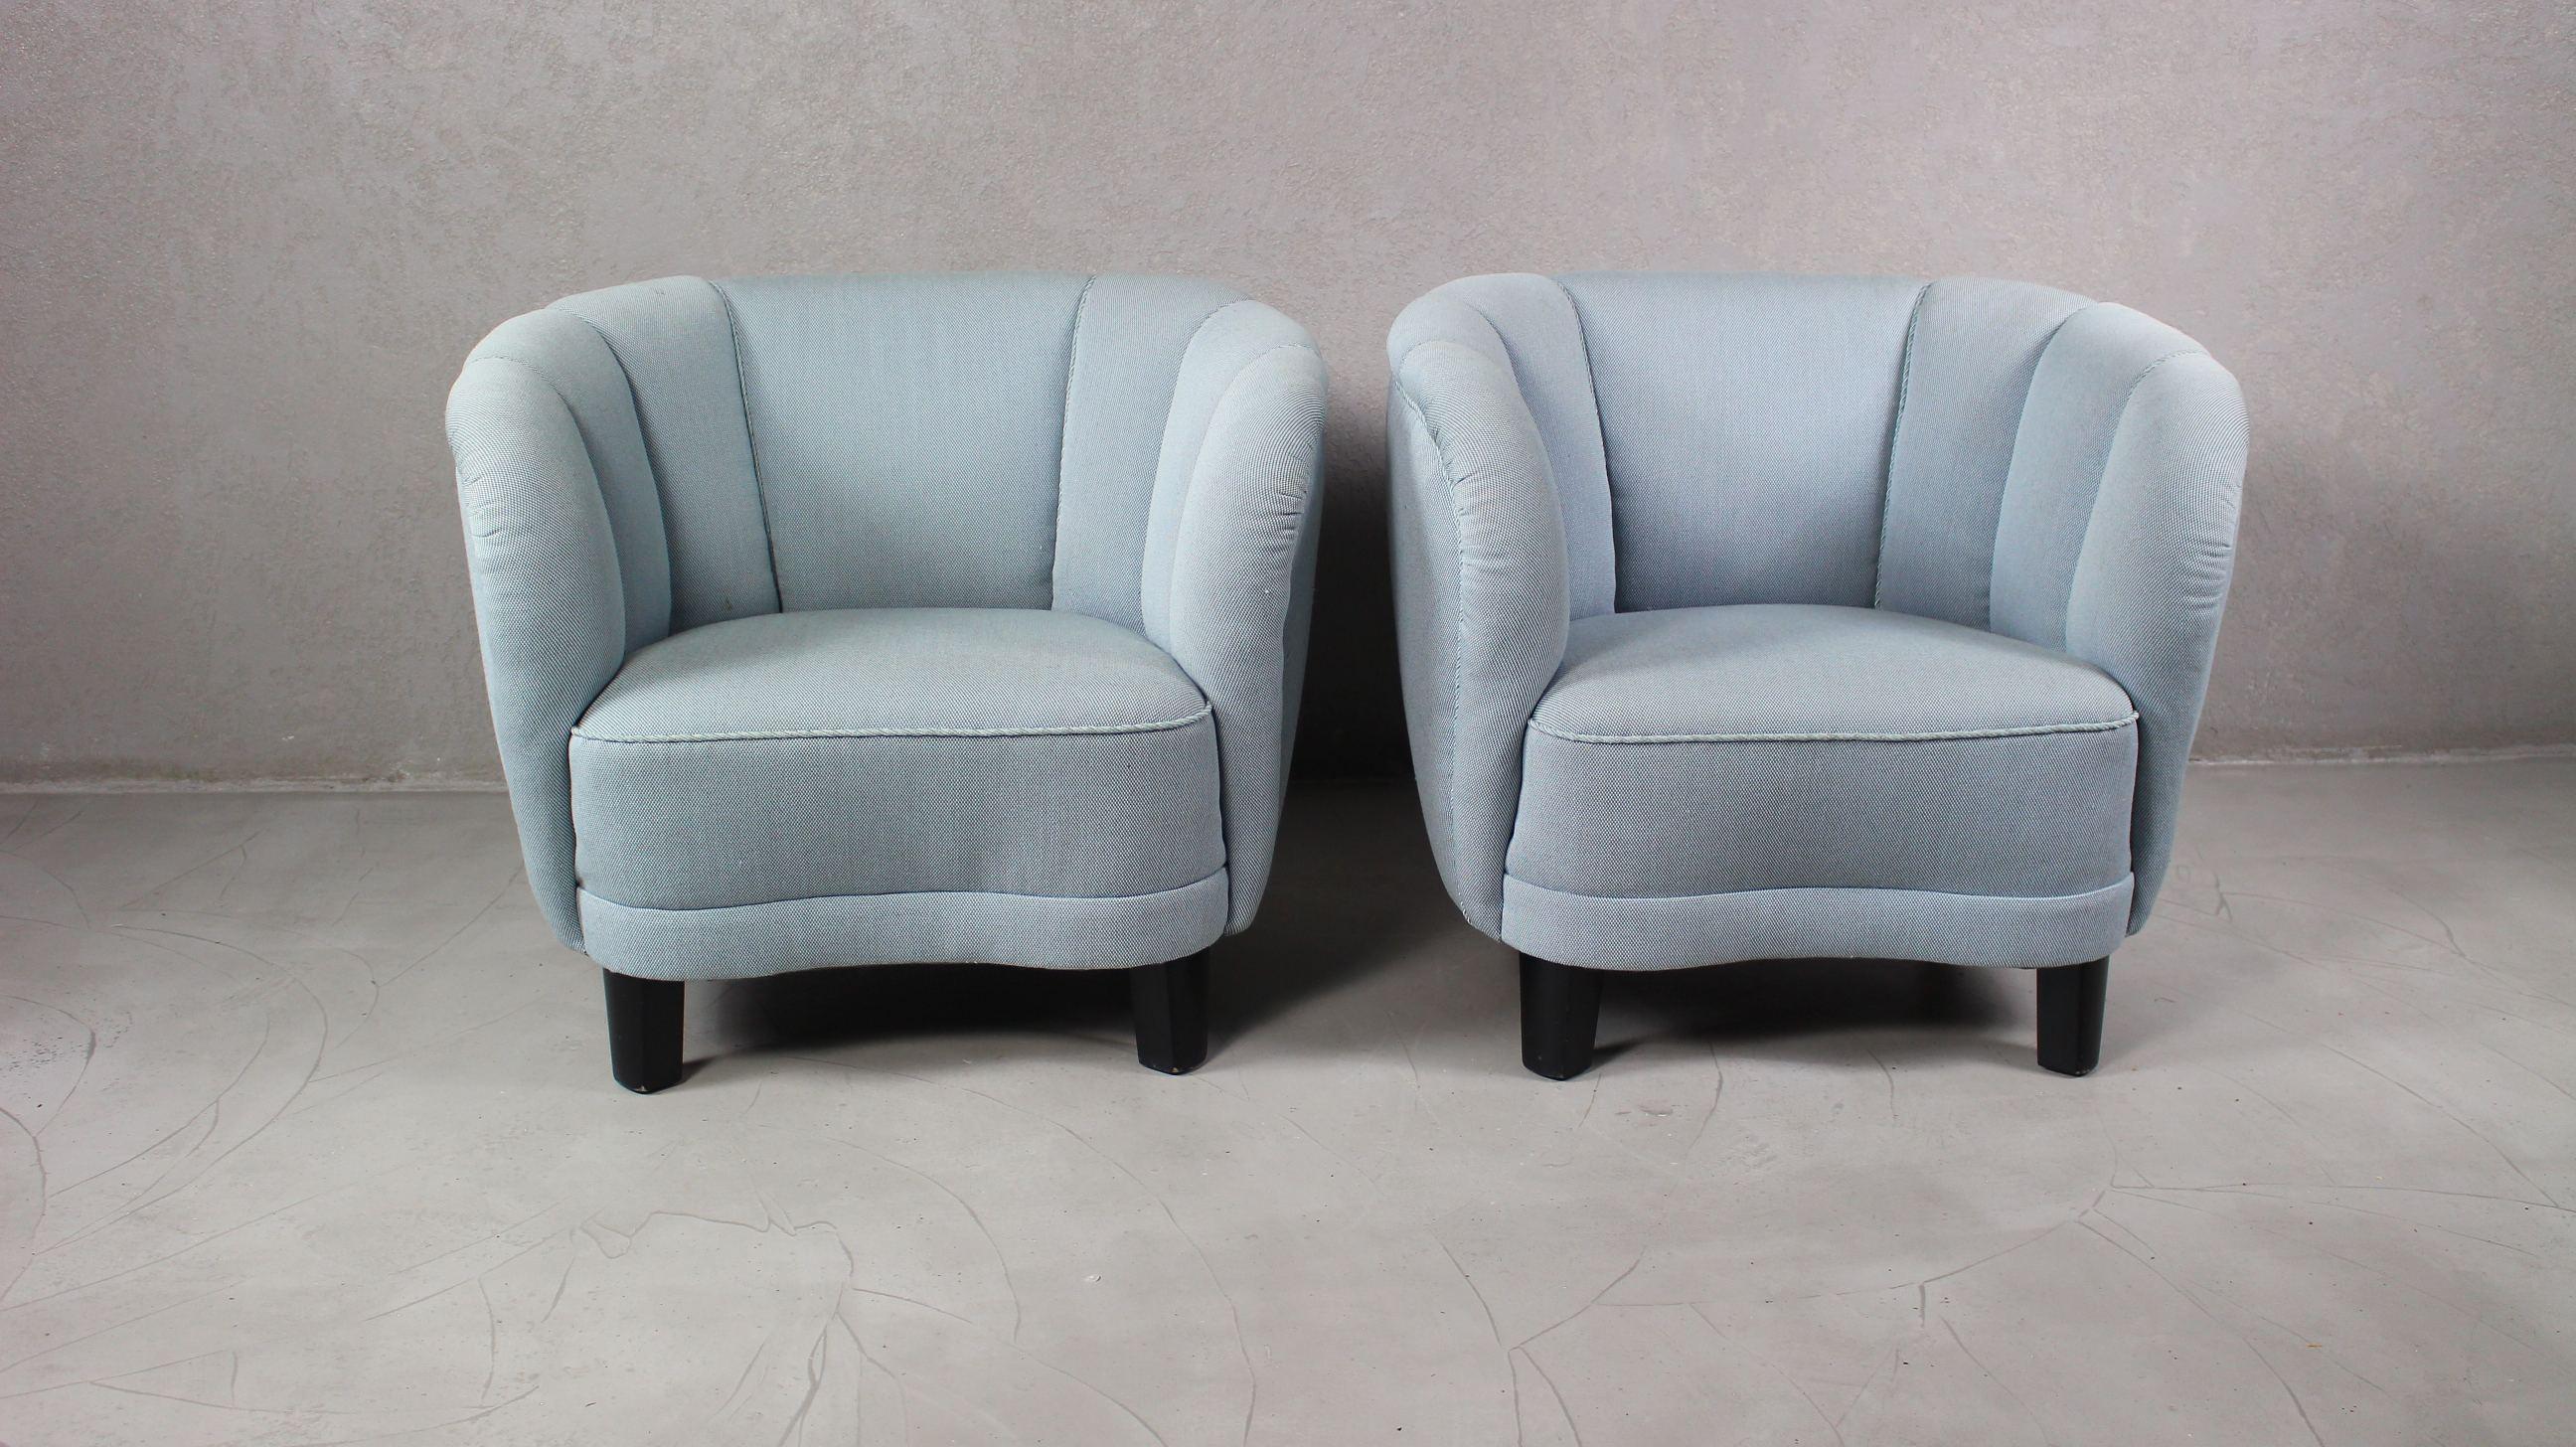 Pair of Danish lounge chairs perfectly capturing the essence of 1940s Danish design coming out of the Art Deco era and into the midcentury.
The curved backrests and low slung proportions and block feet in beechwood clearly hint at inspiration from